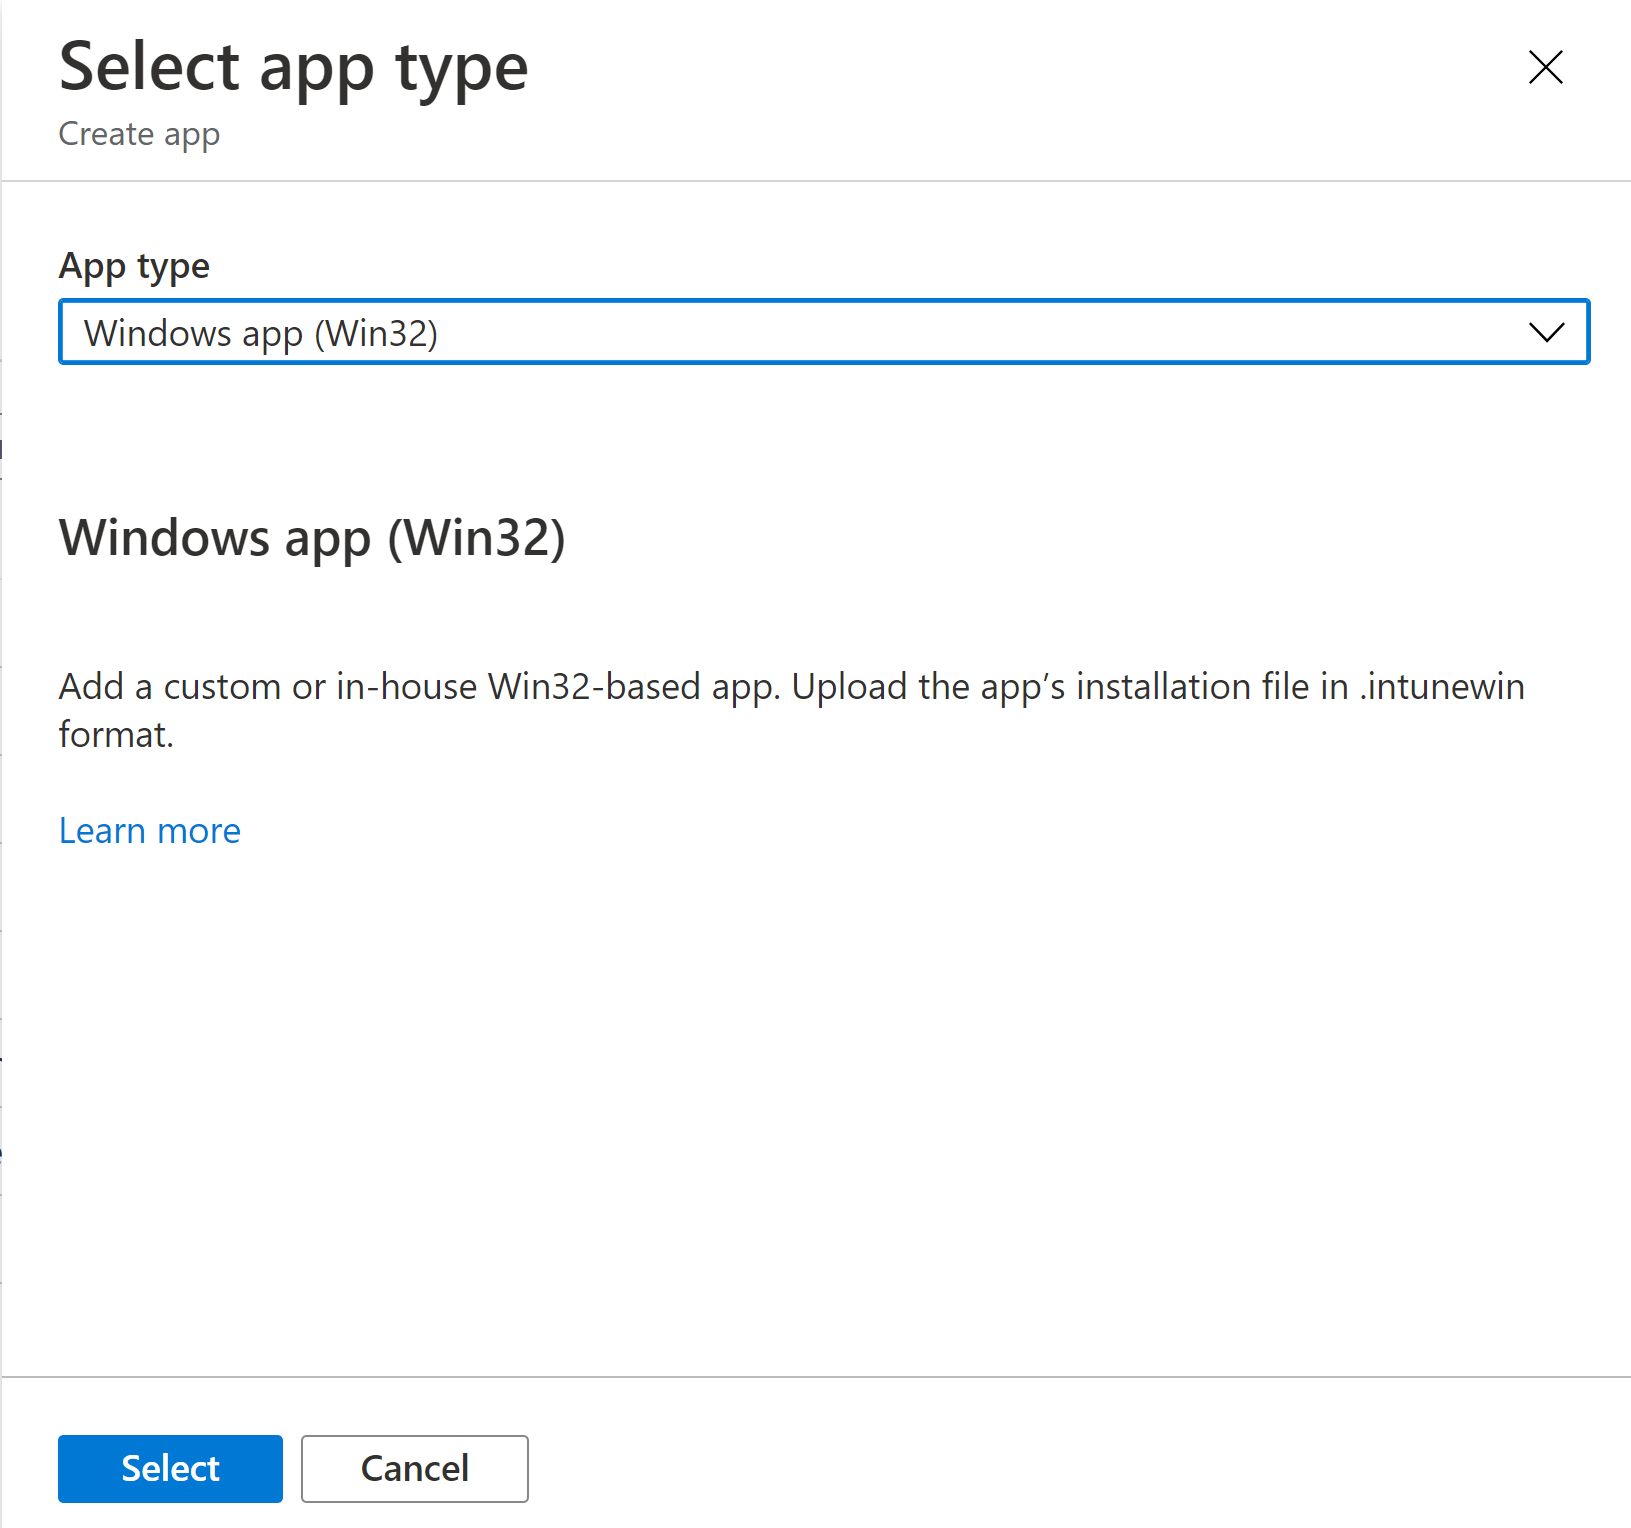 Microsoft-Endpoint-Manager-Select-App-Type